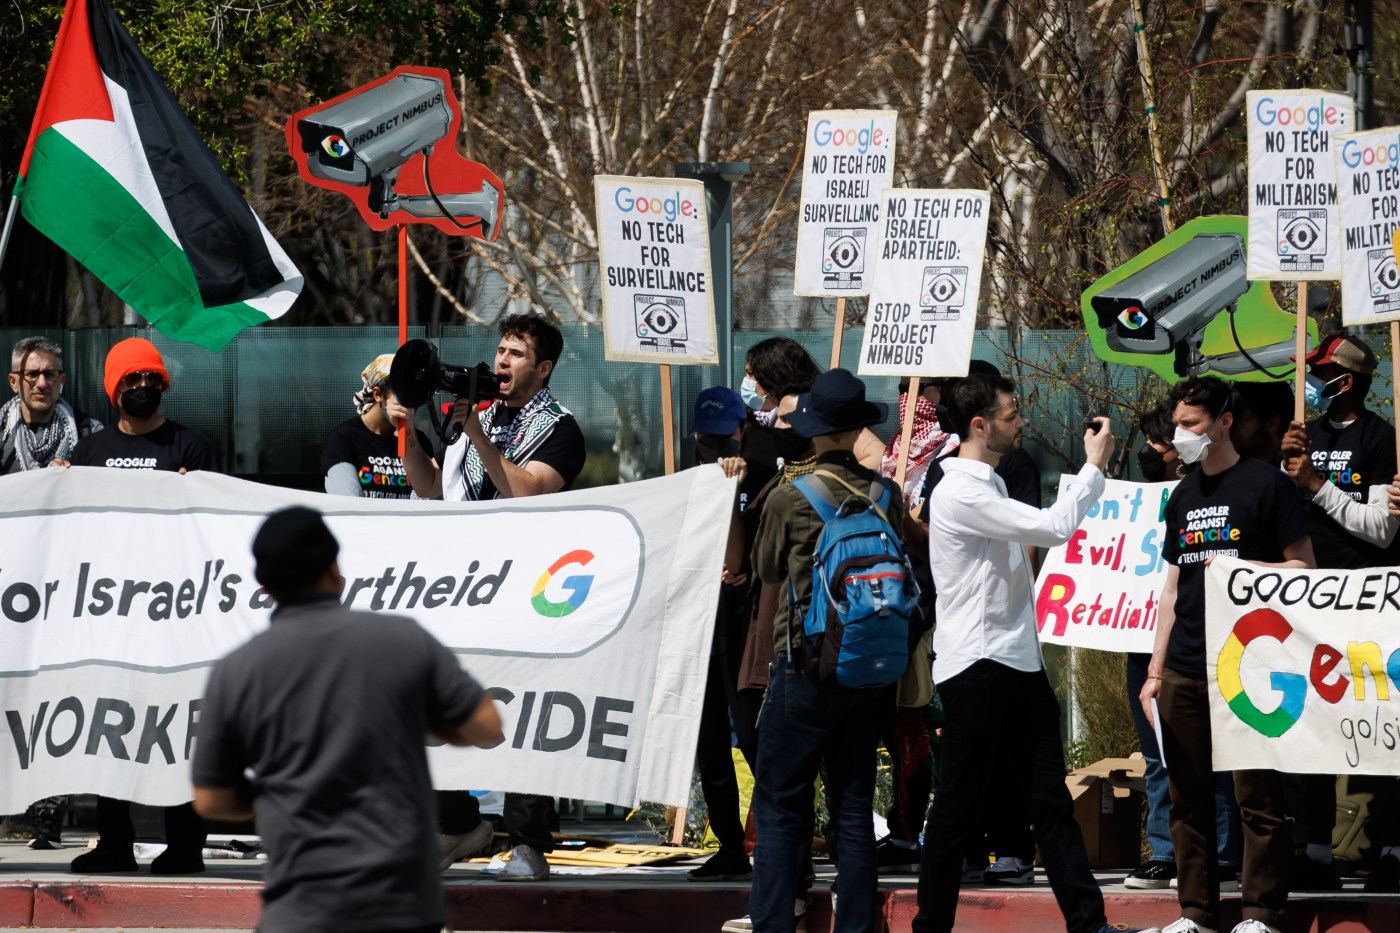 google-fires-28-employees-following-sunnyvale,-new-york-protests